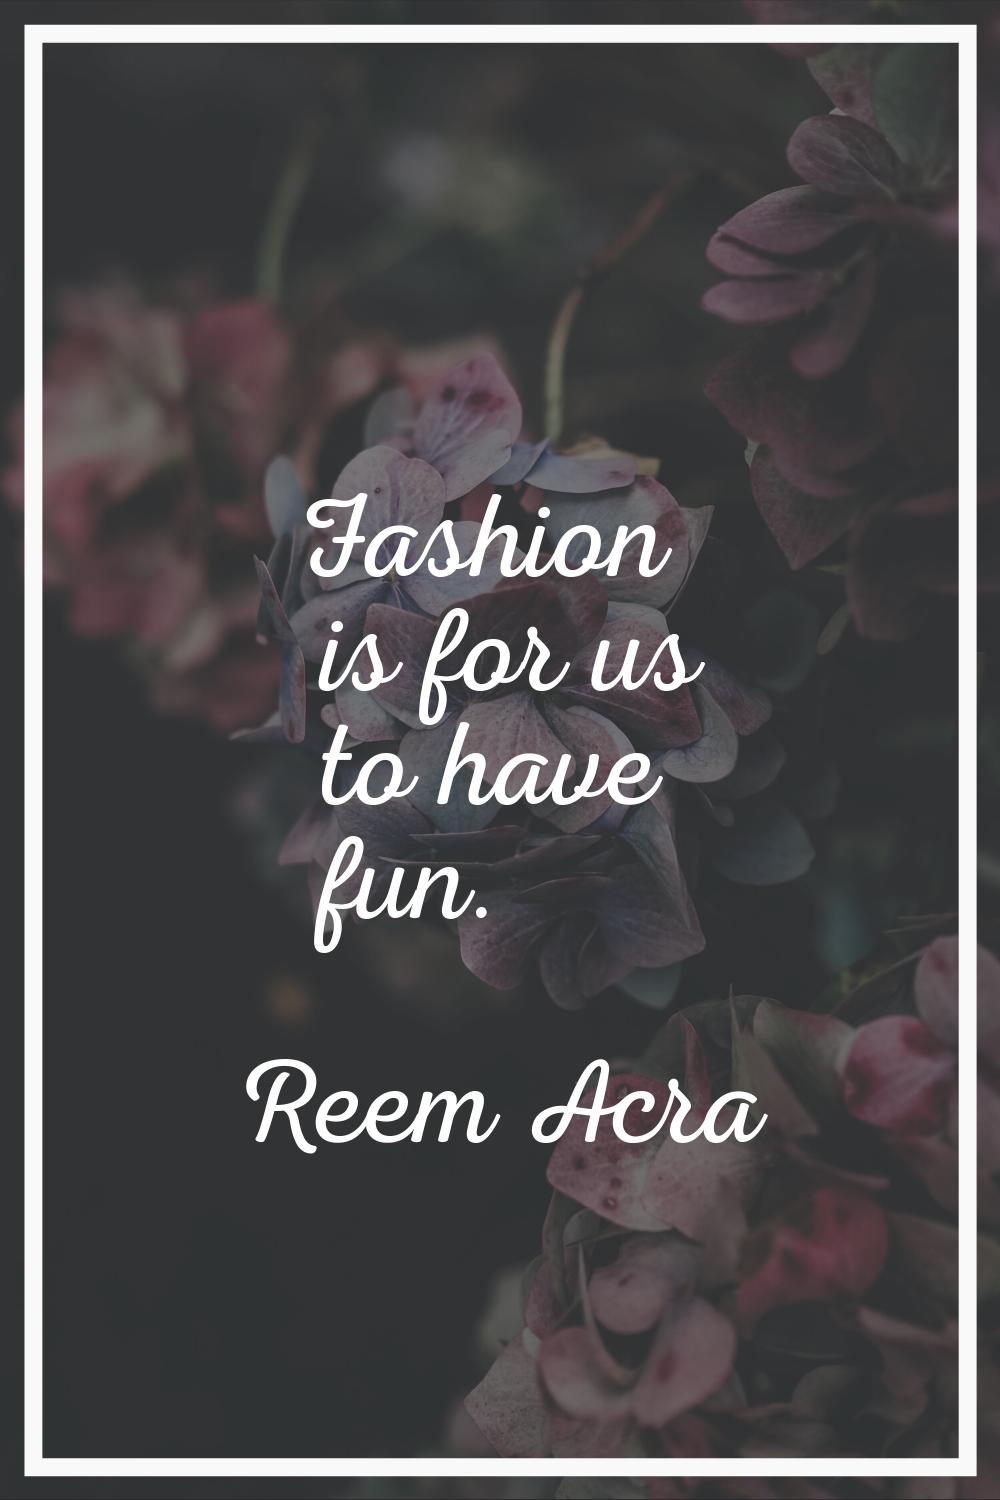 Fashion is for us to have fun.